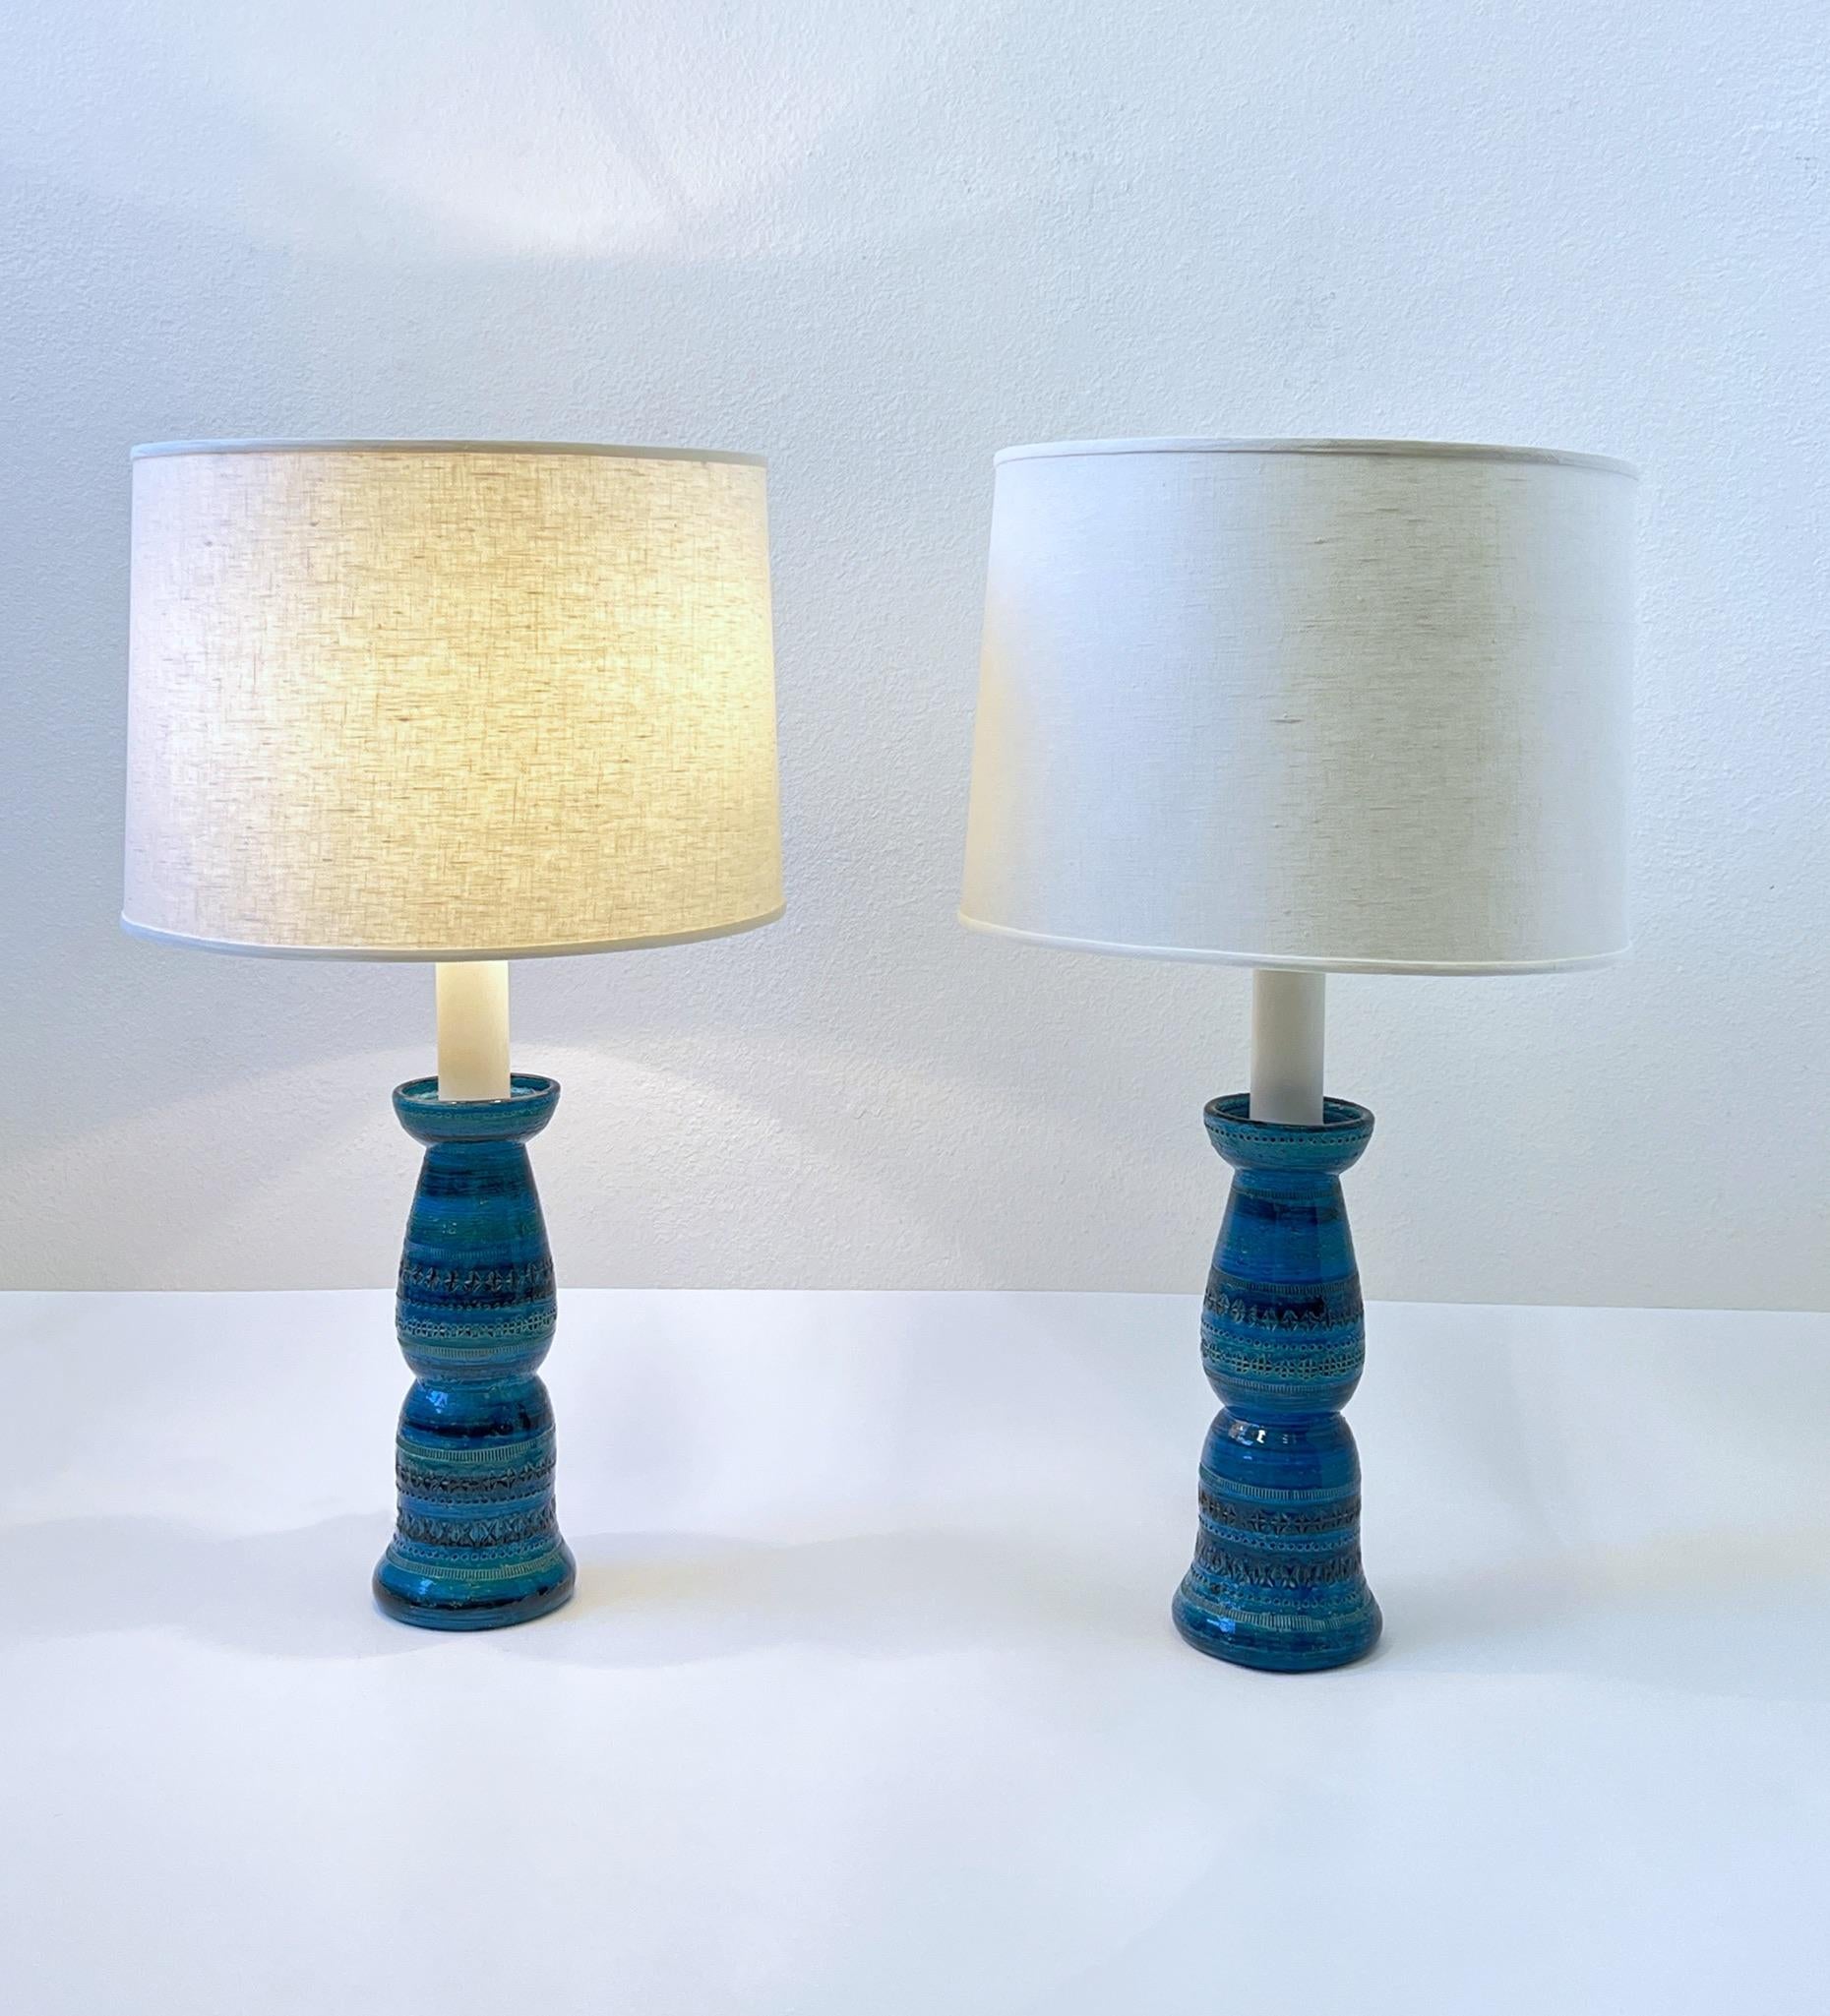 Mid-Century Modern Pair of Italian Ceramic and Nickel Table Lamps by Aldo Londi for Bitossi